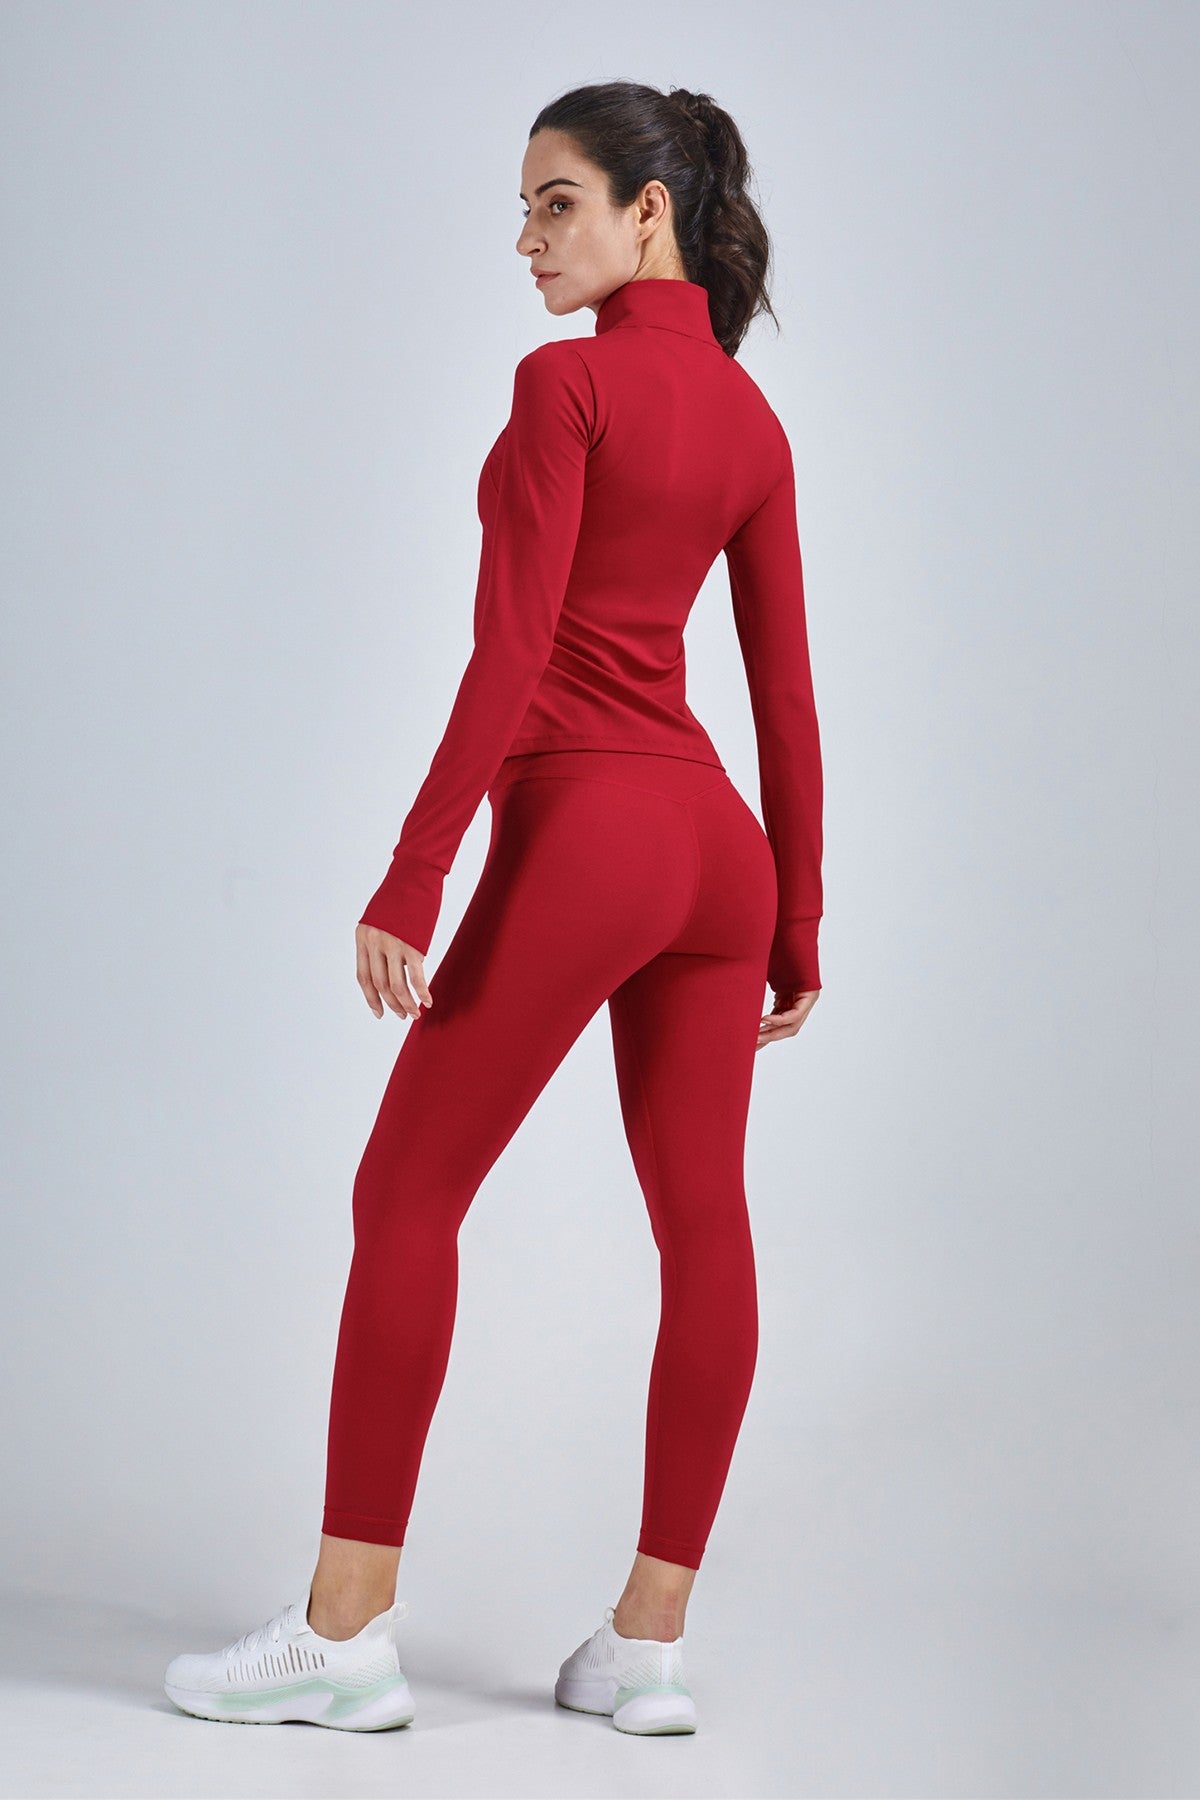 Red Fitted Track Jacket & Leggings Set Activewear for Women – Zioccie